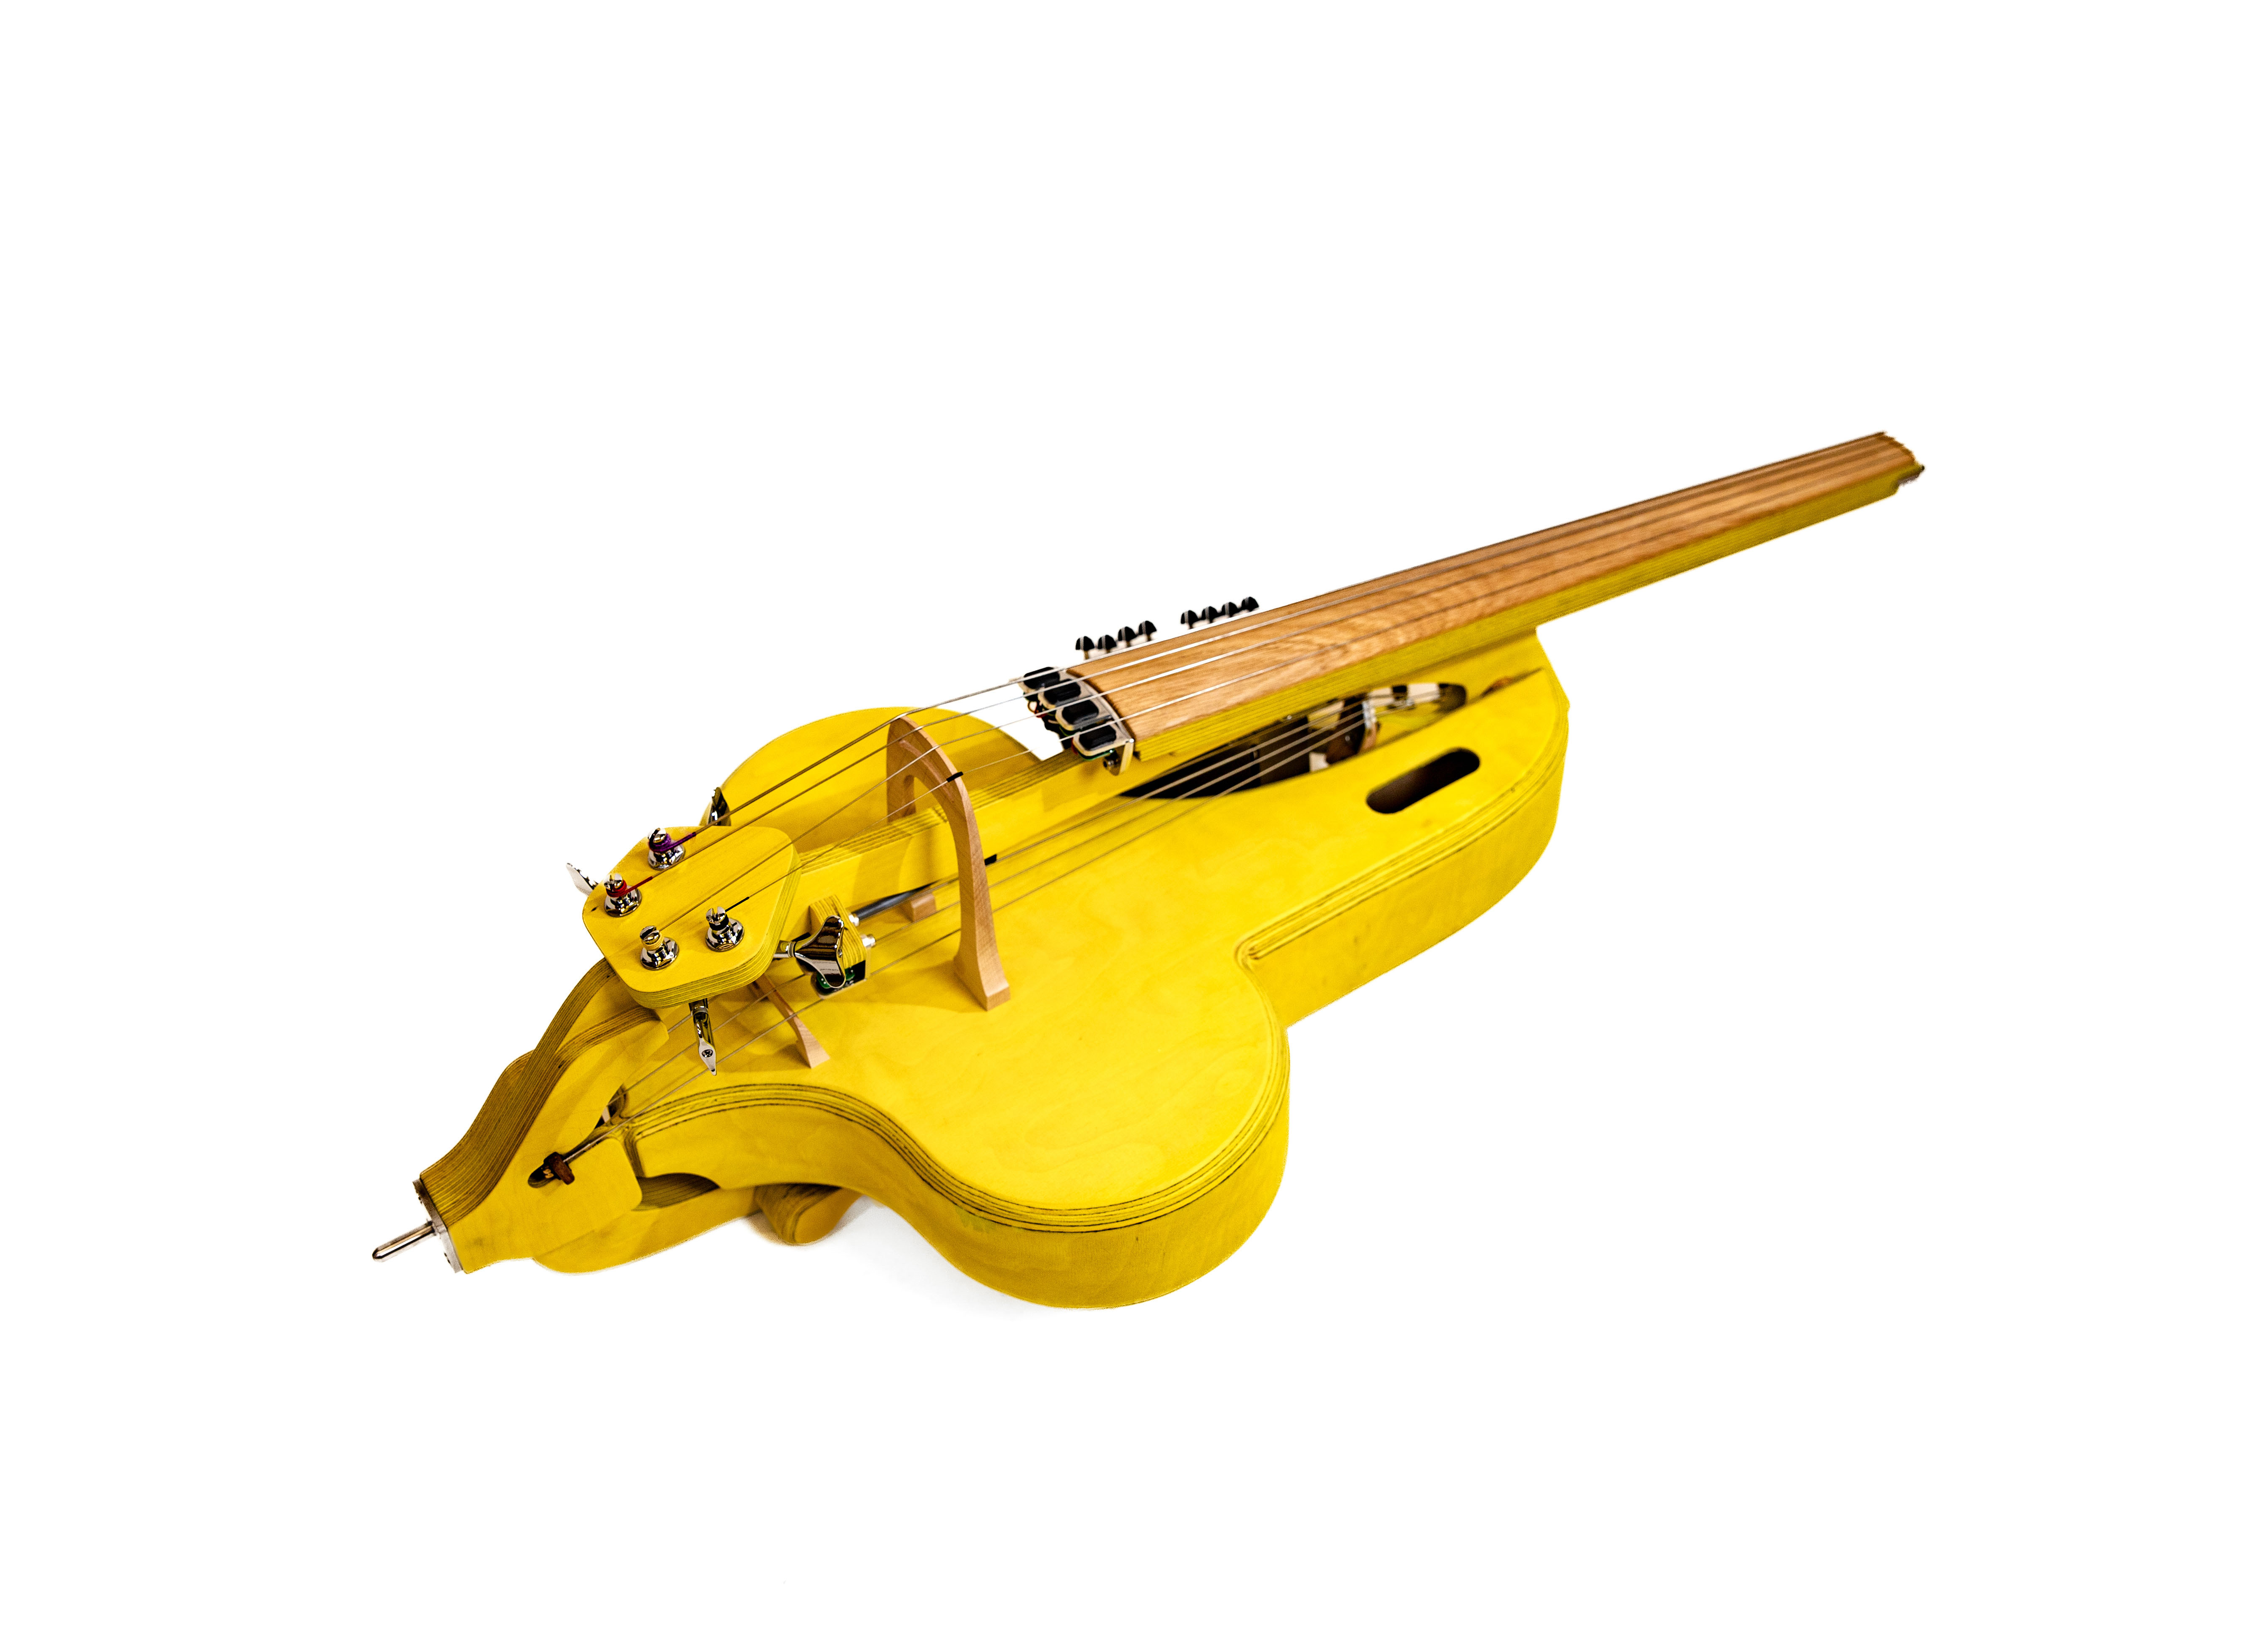 A yellow string instrument with feedback abilities